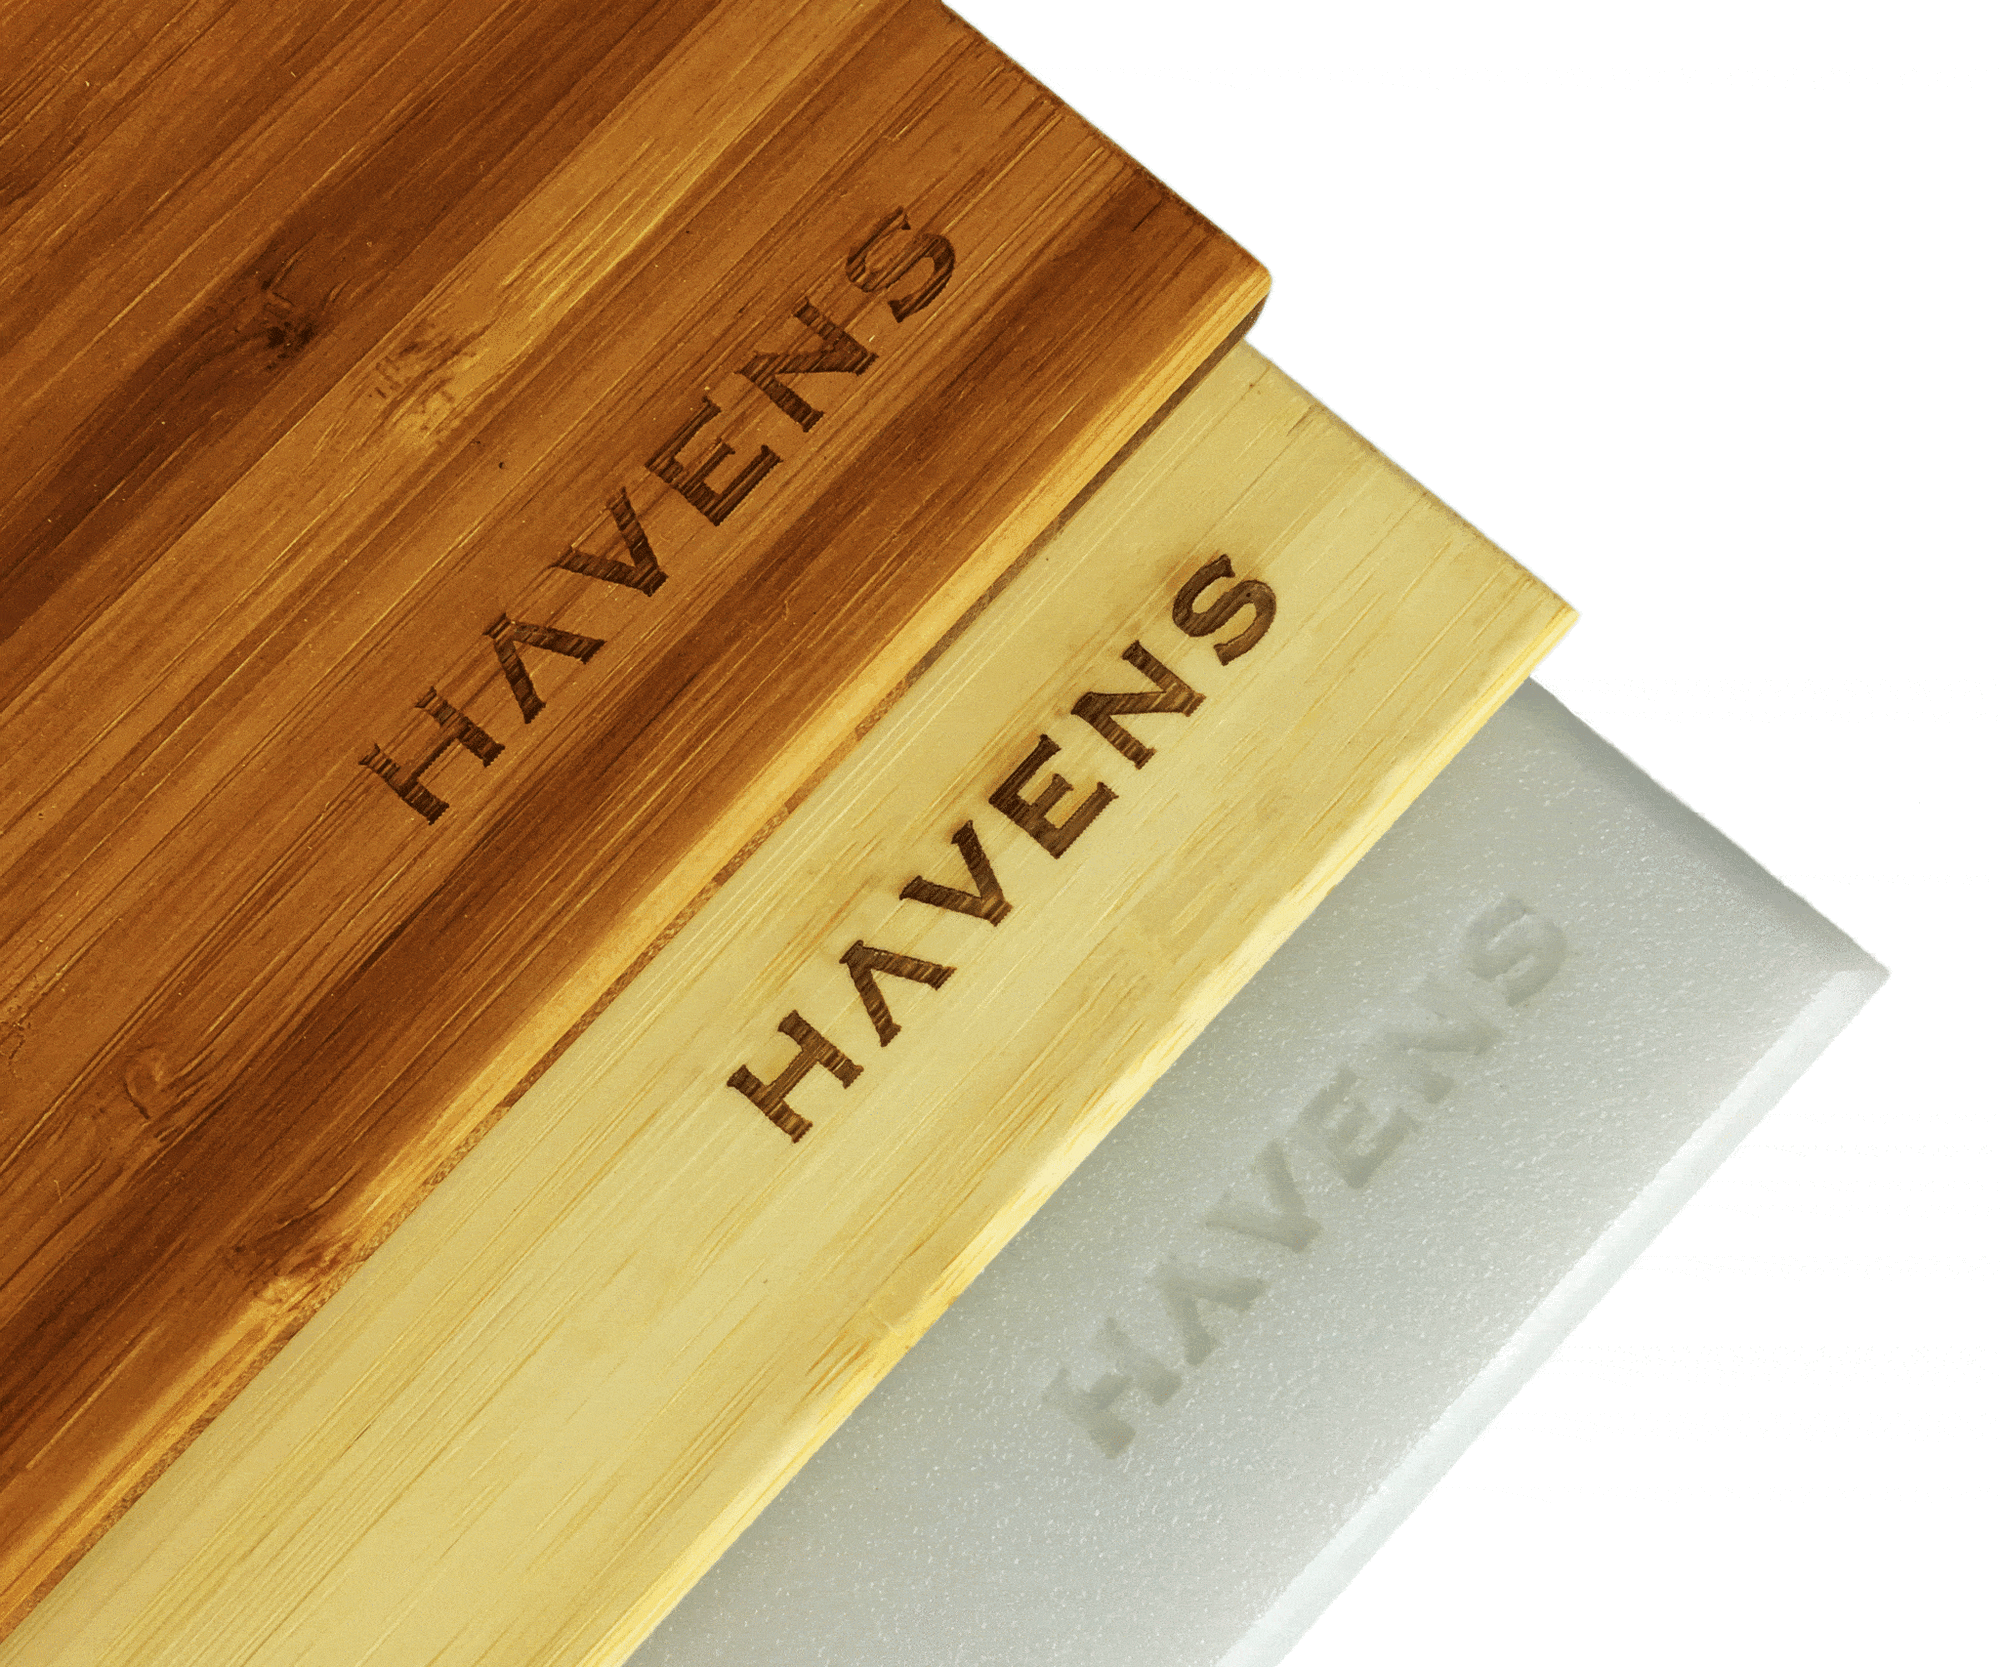 Havens Cutting Board Profiles - Amber, Light Bamboo and White Poly